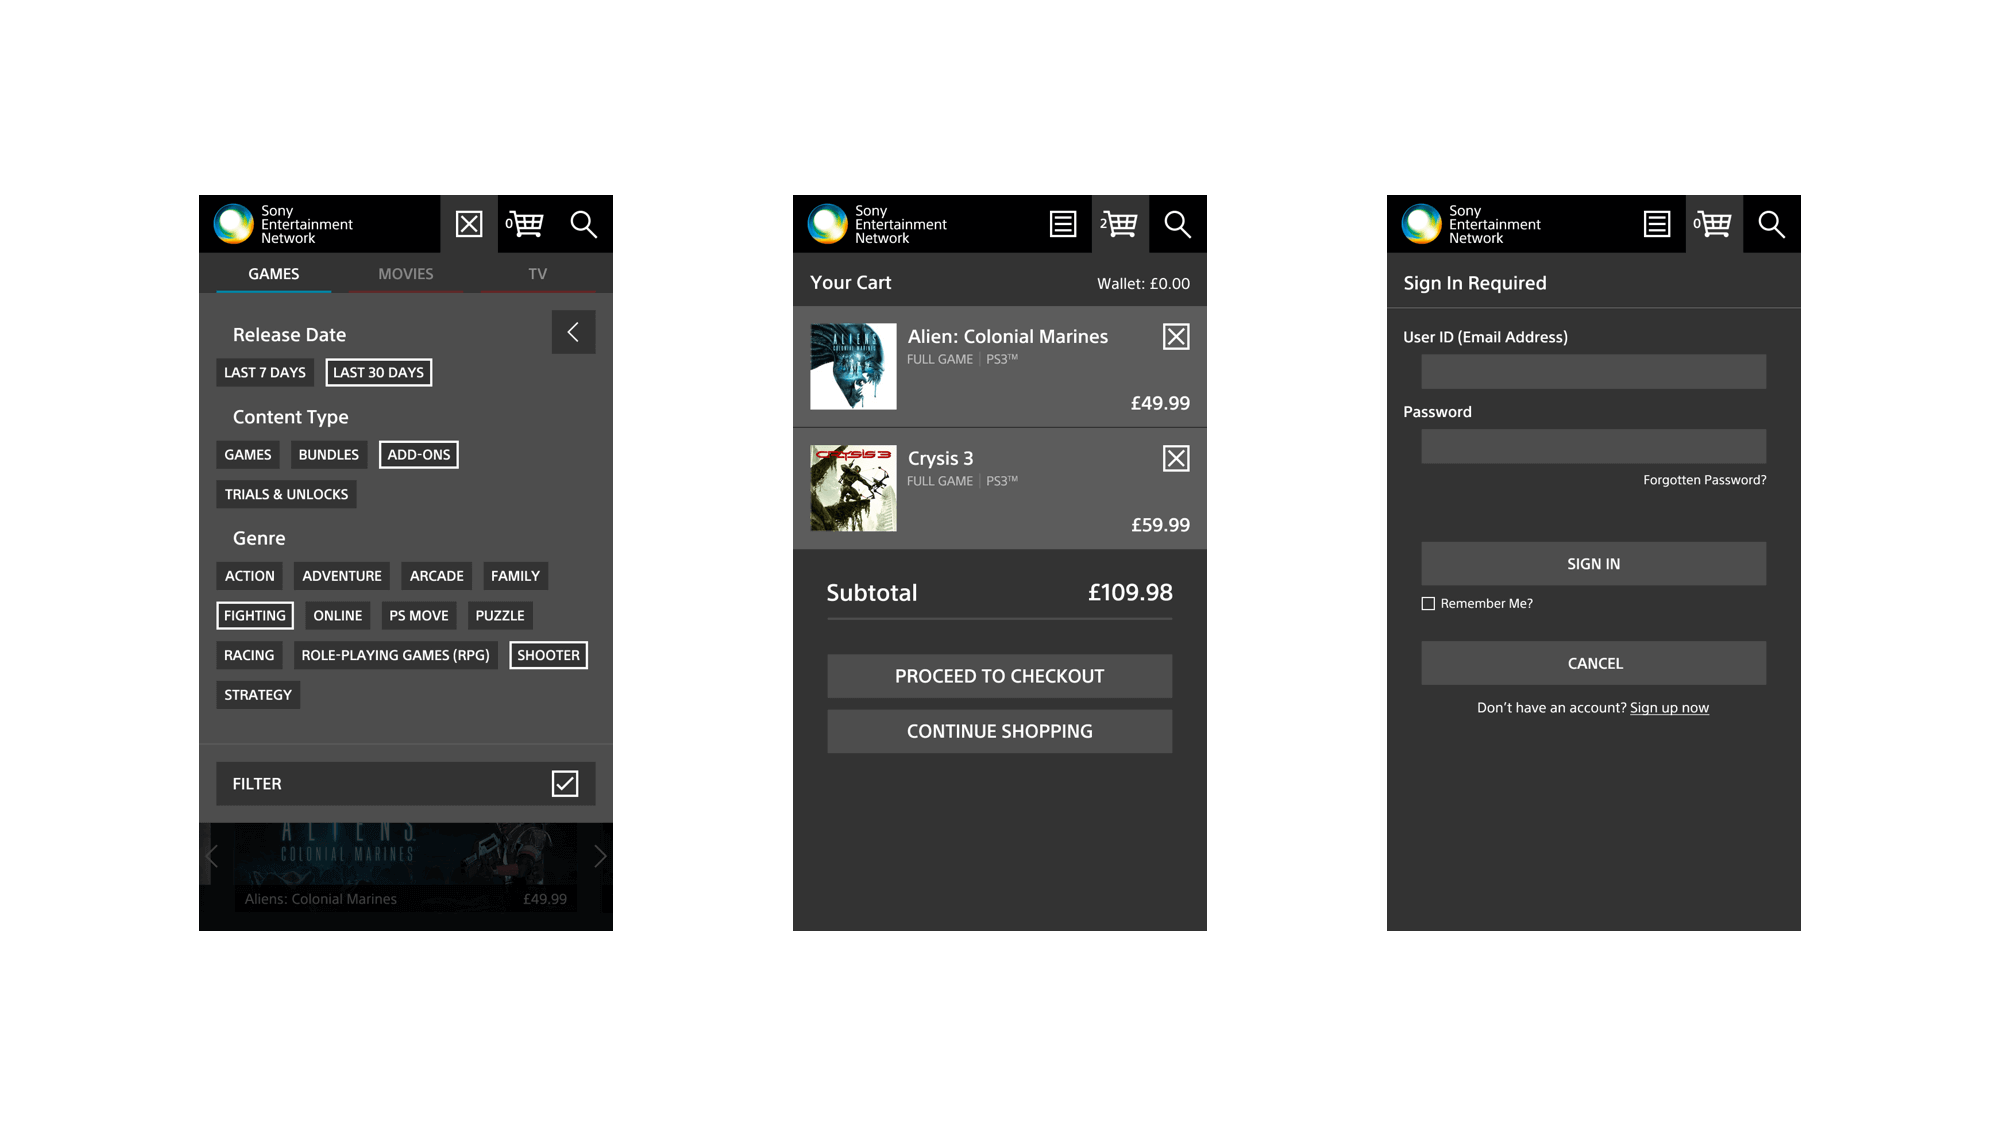 L-R: PlayStation Store mobile designs for filtering (menu overlay), shopping cart page, and user account page